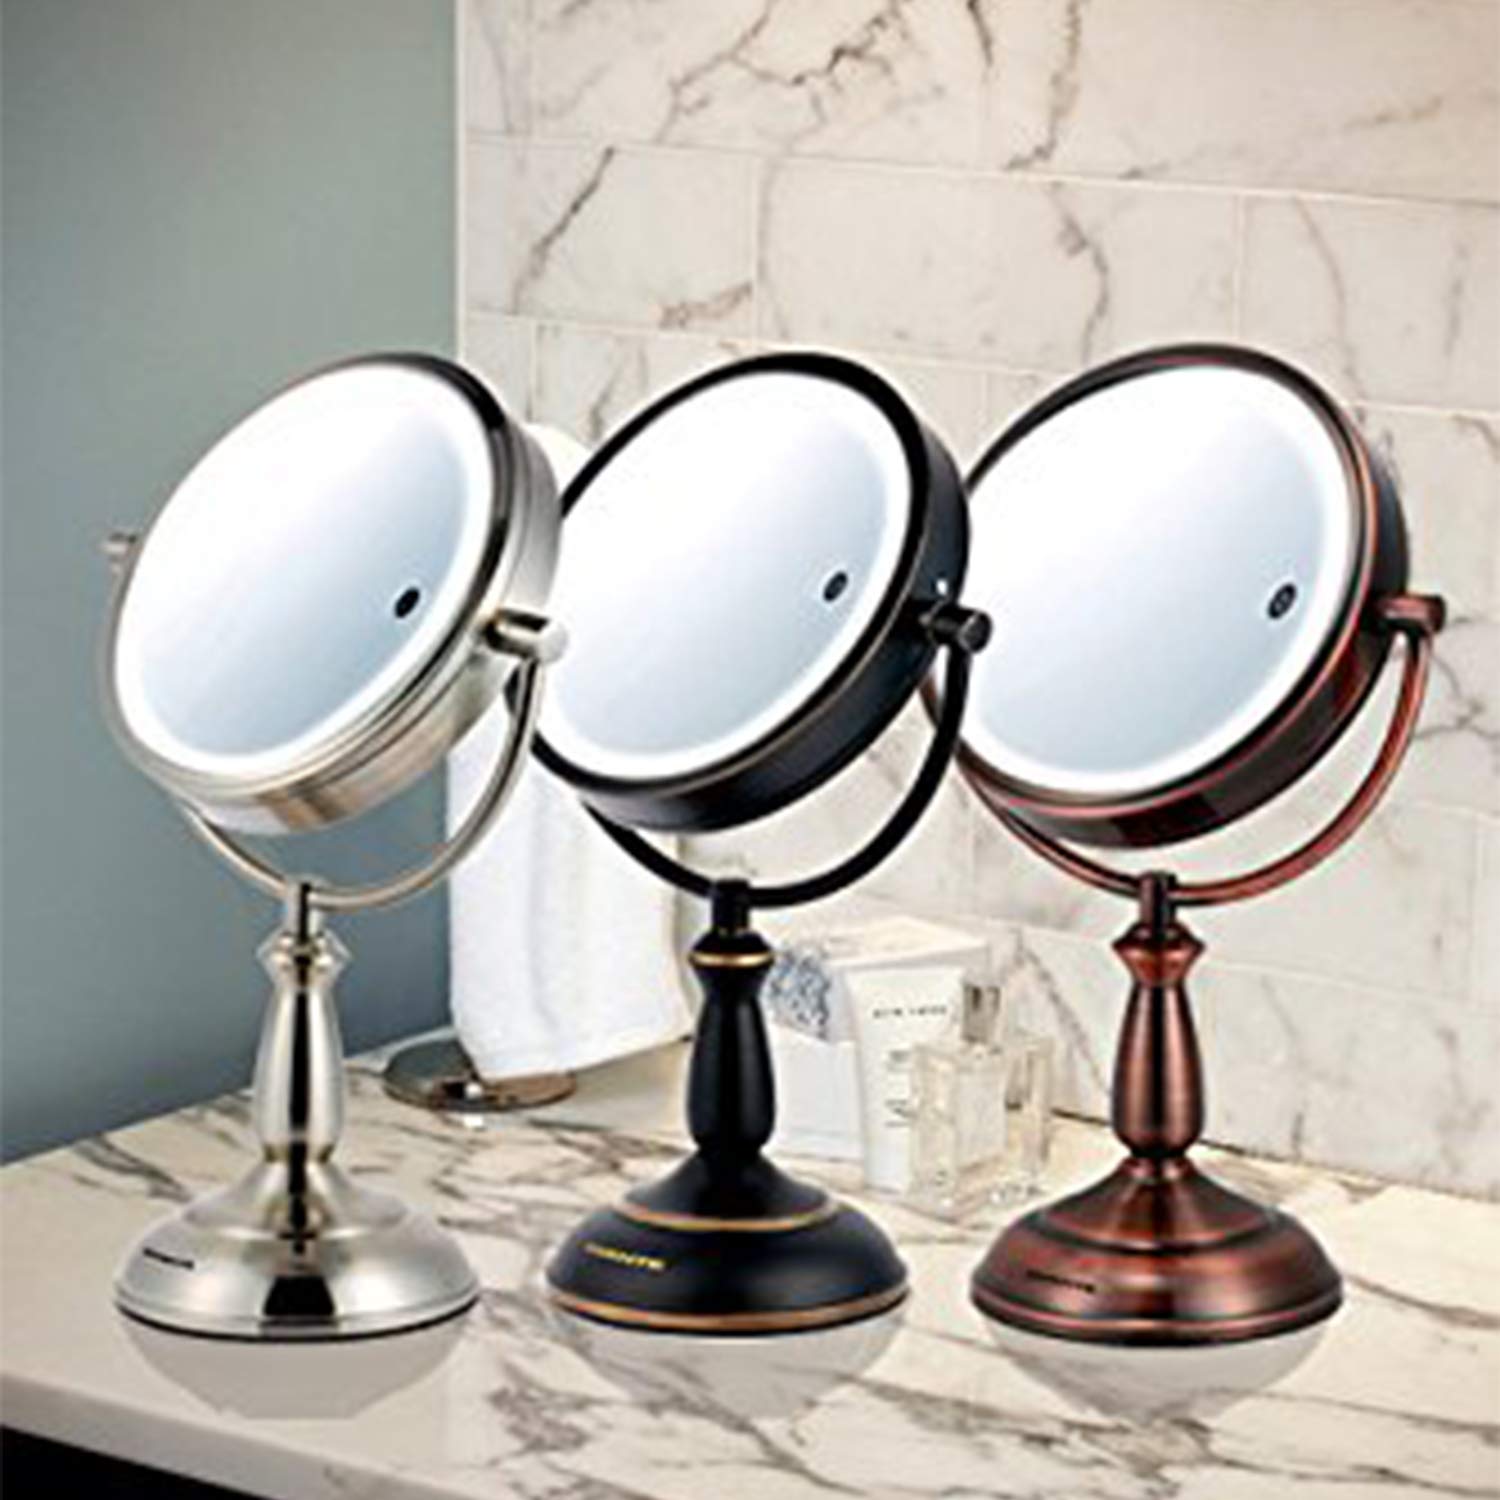 Ovente 7.5" Lighted Tabletop Vanity Makeup Mirror, Magnifier Spinning Double Sided, MPT75CO1X10X - image 5 of 10